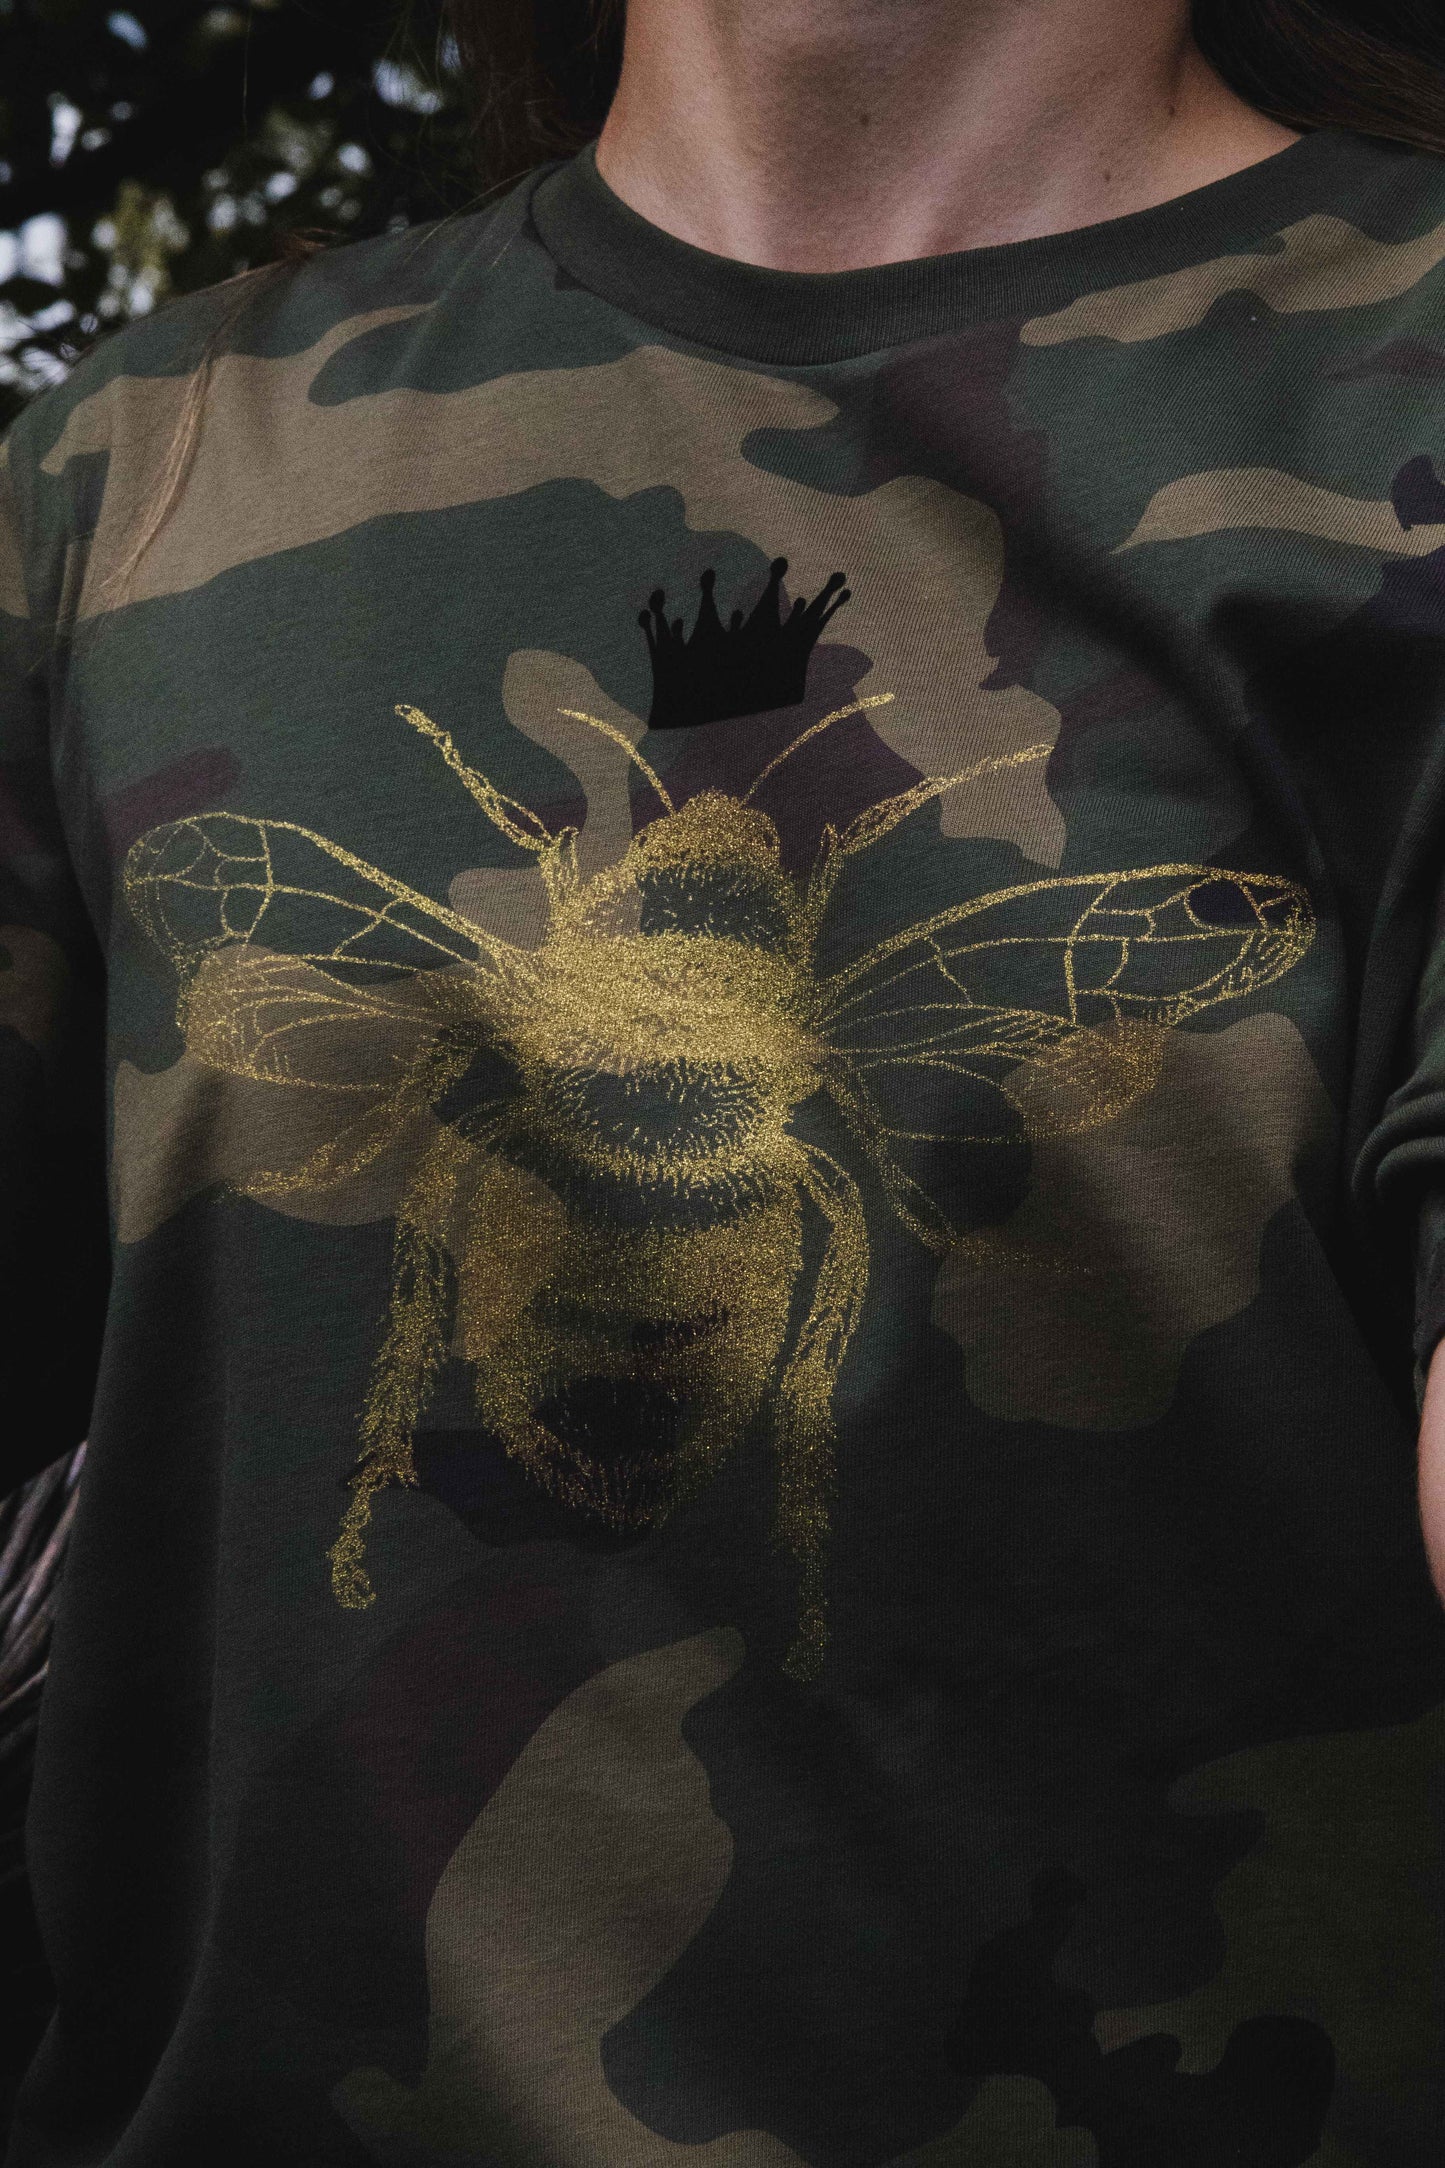 Golden bee on a military pattern tee